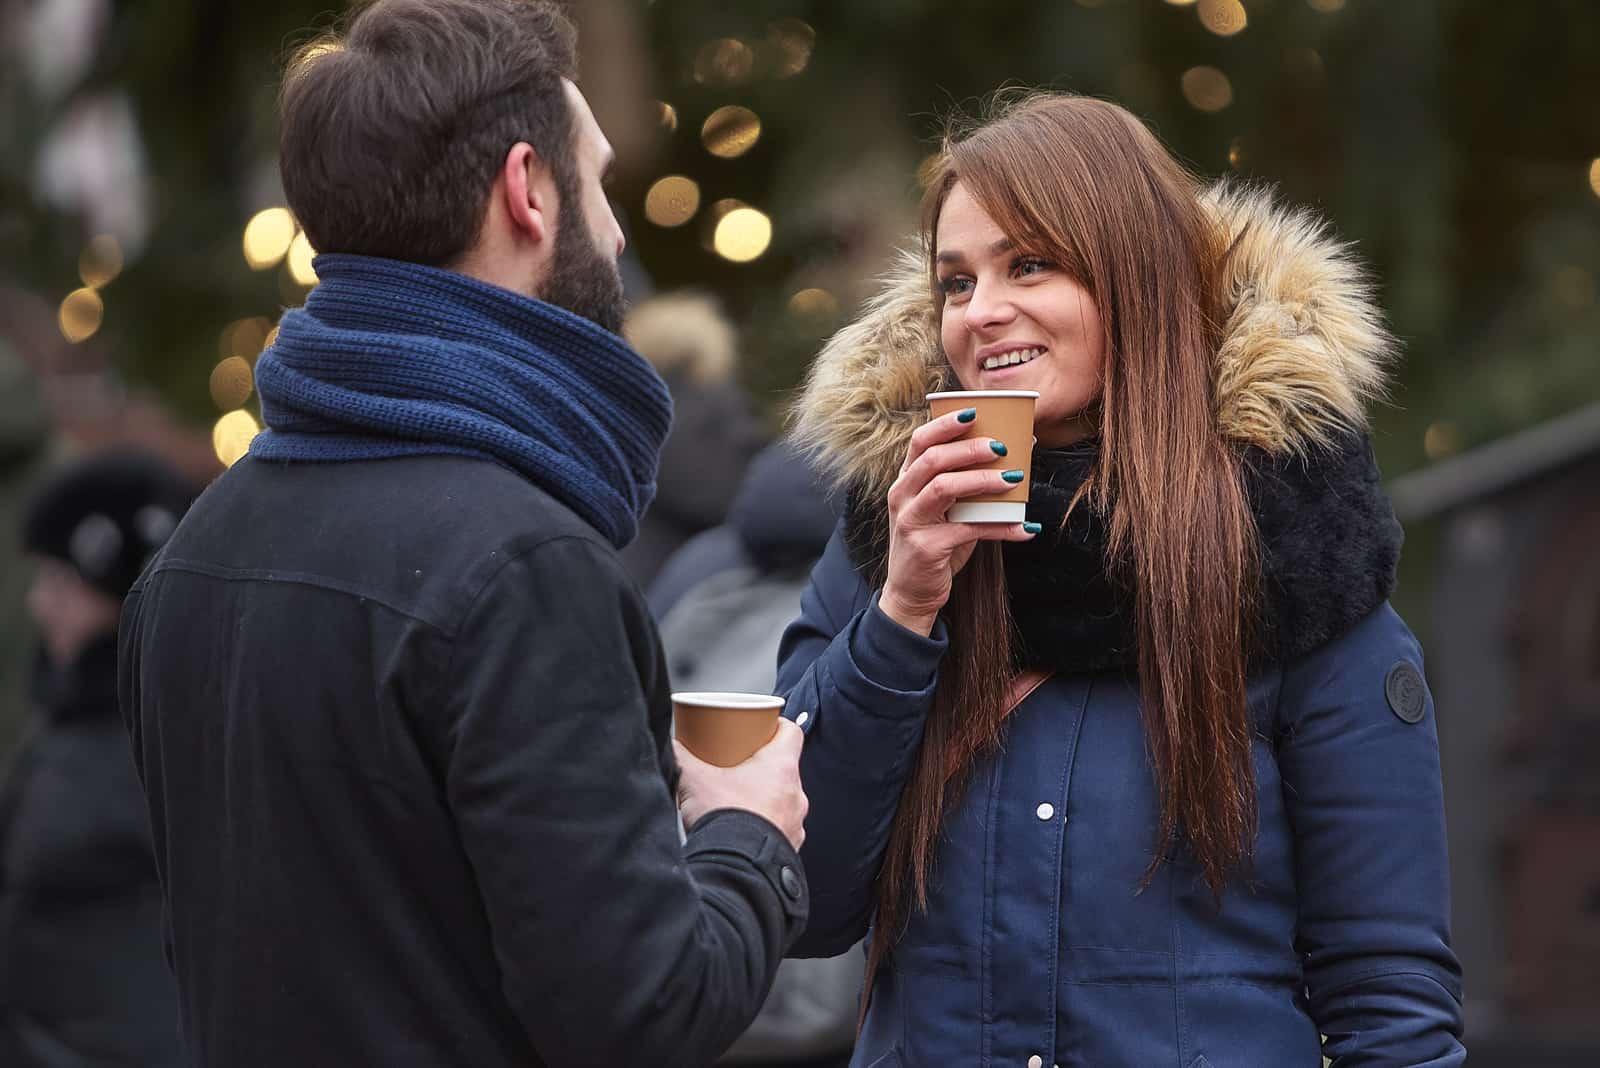 a smiling man and woman standing outdoors holding cups of coffee in their hand and talking